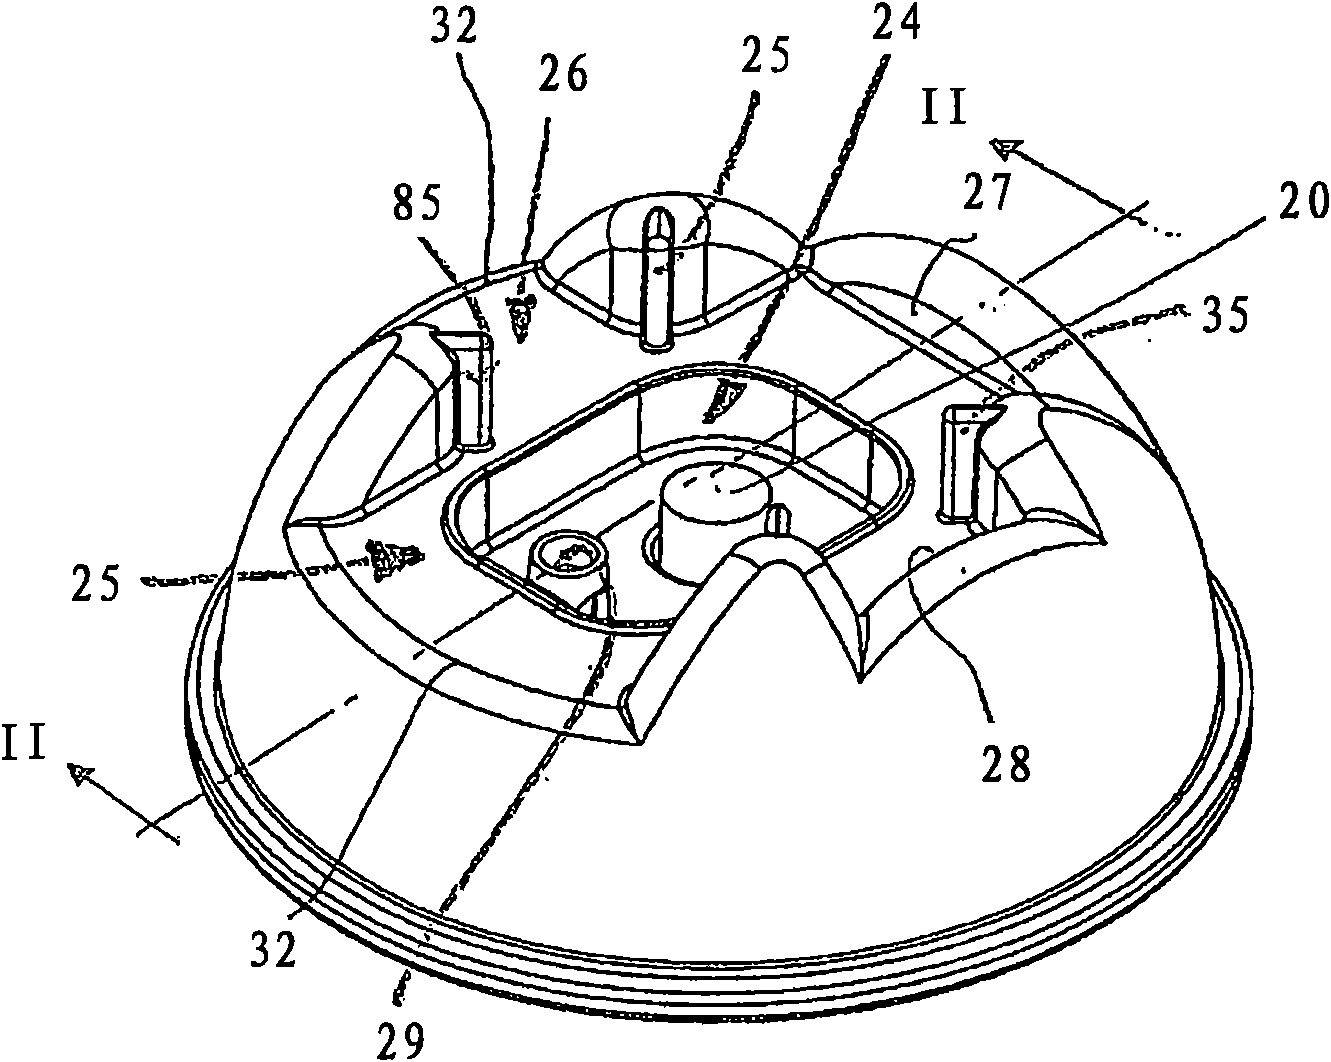 Apparatus for refilling an ink cartridge for an inkjet printer